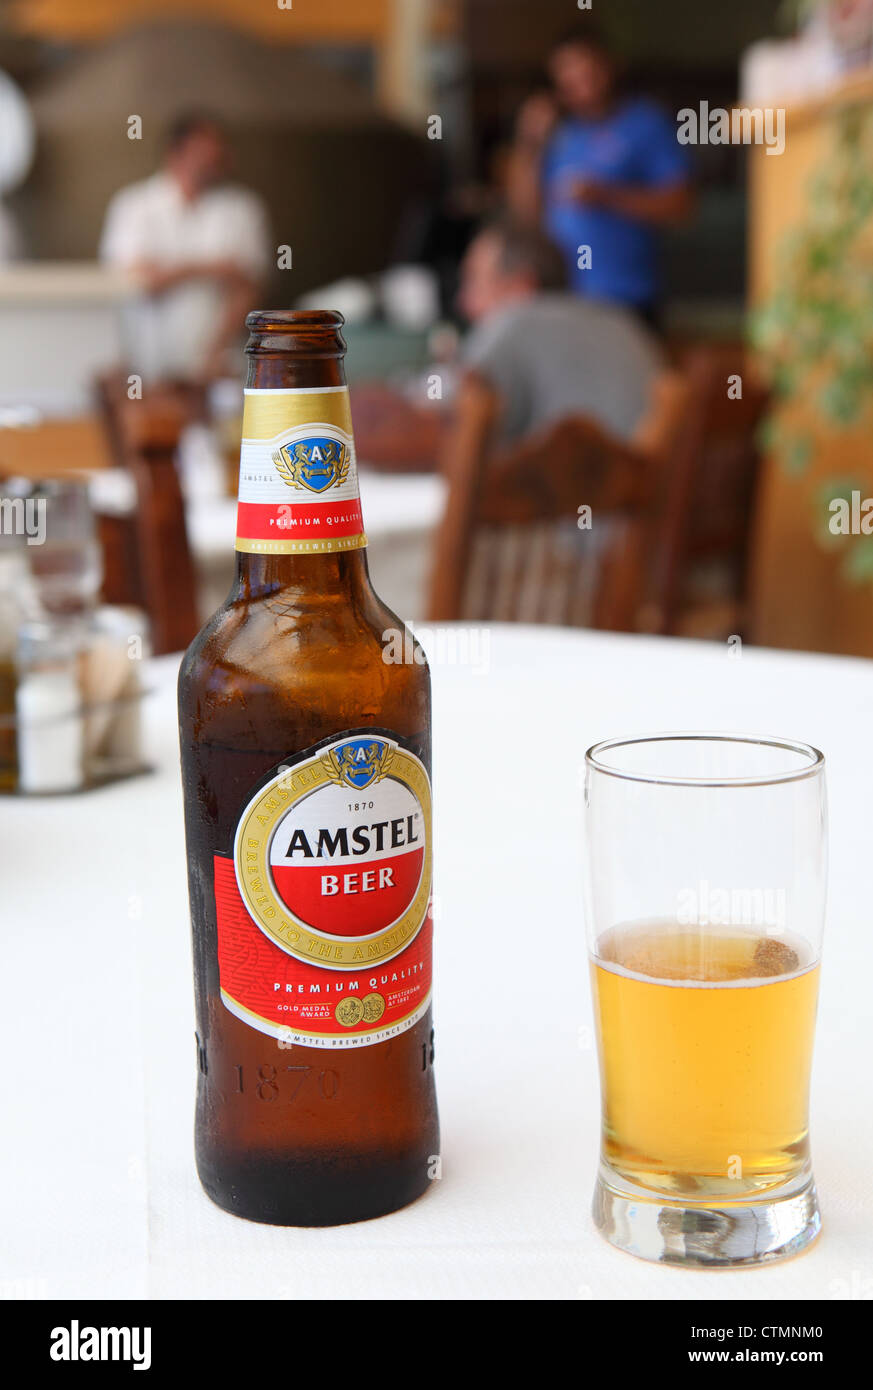 A bottle and glass of Amstel lager beer in a Greek taverna in Rethymno, Crete Stock Photo